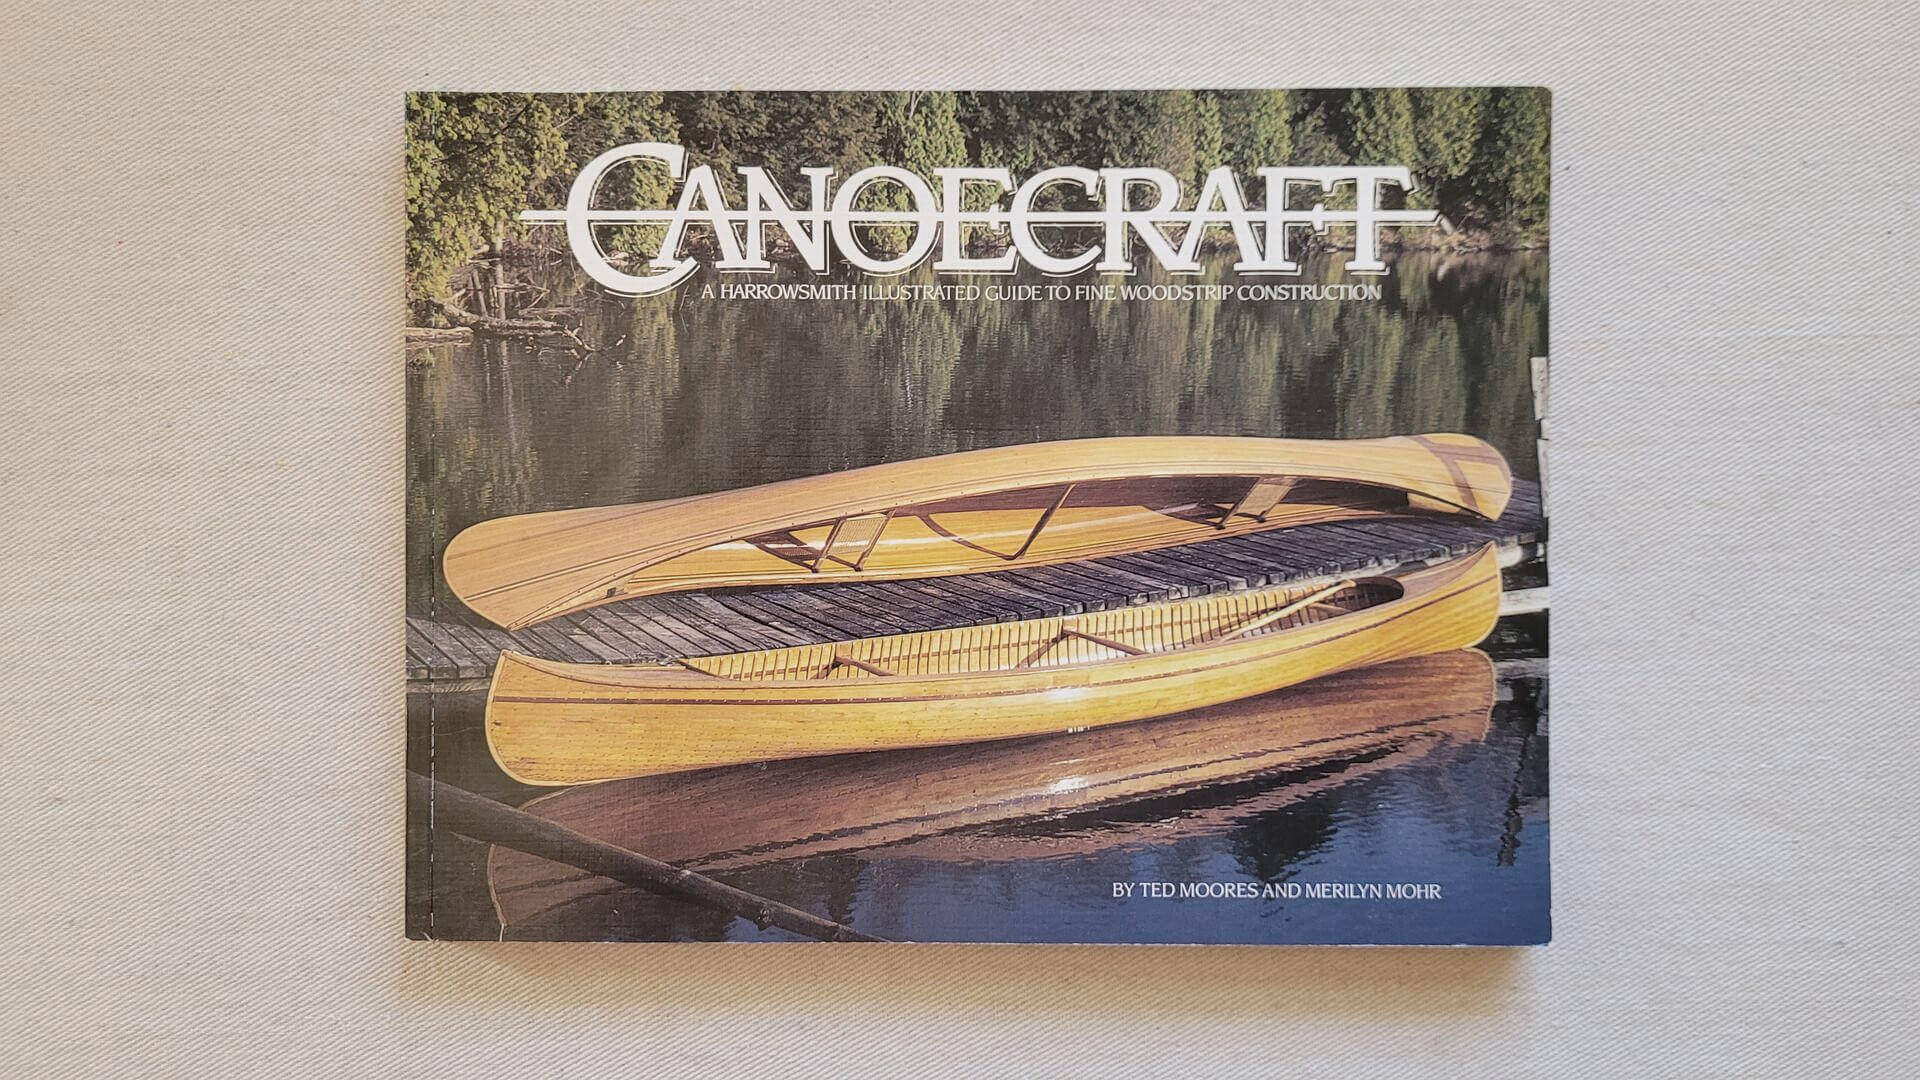 Canoecraft - A Harrowsmith Illustrated Guide to Fine Woodstrip Construction book by Ted Moores and Merilyn mohr. 1983 Camden House Publishing